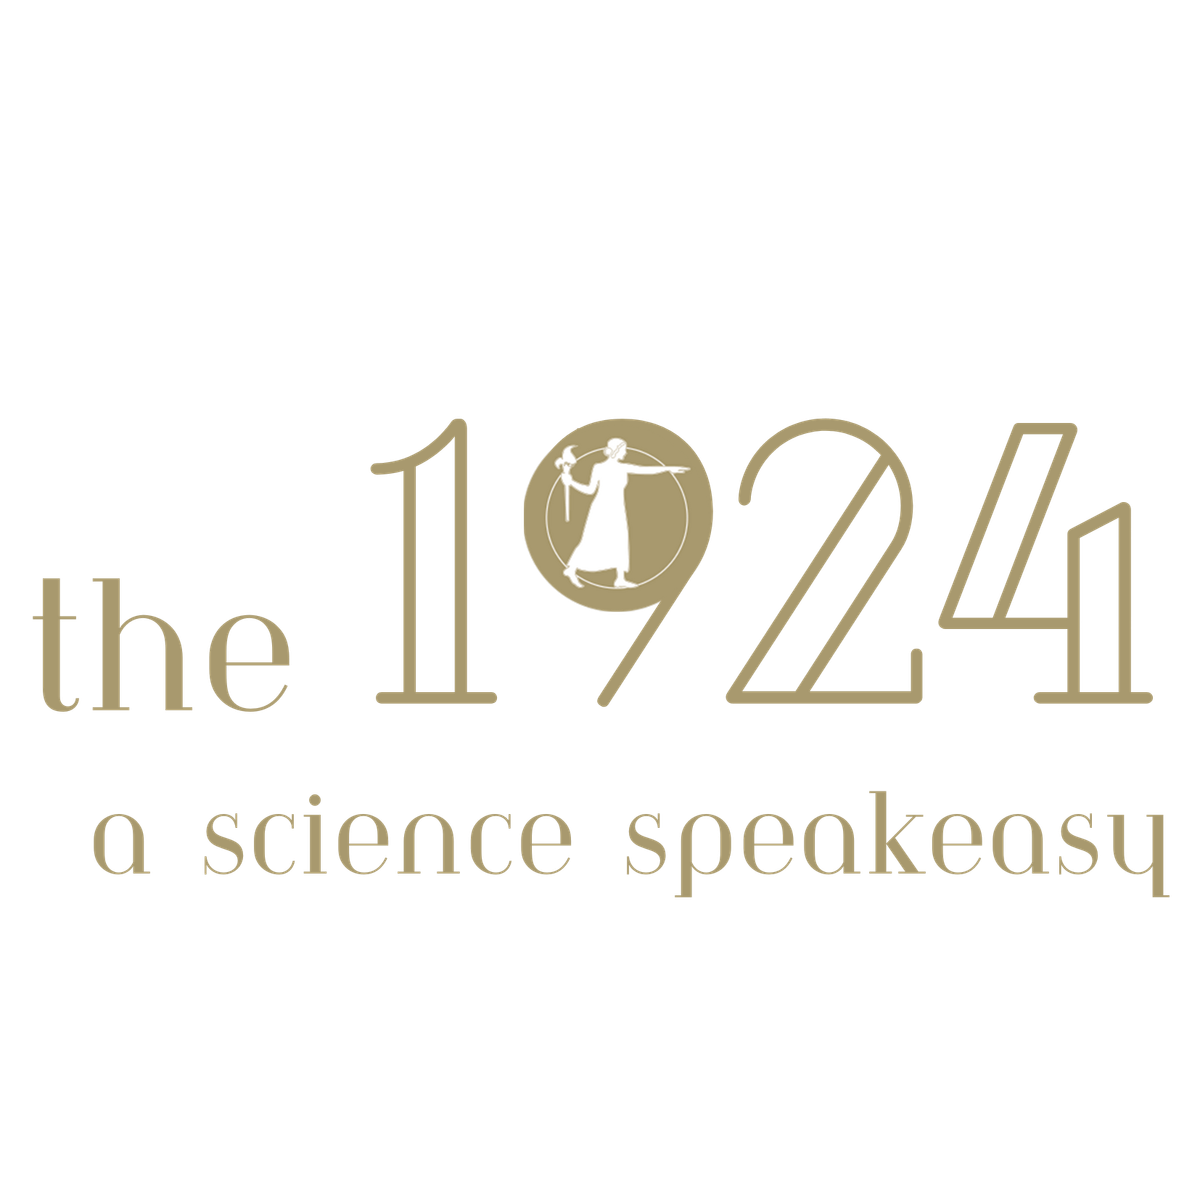 The 1924: A Science Speakeasy